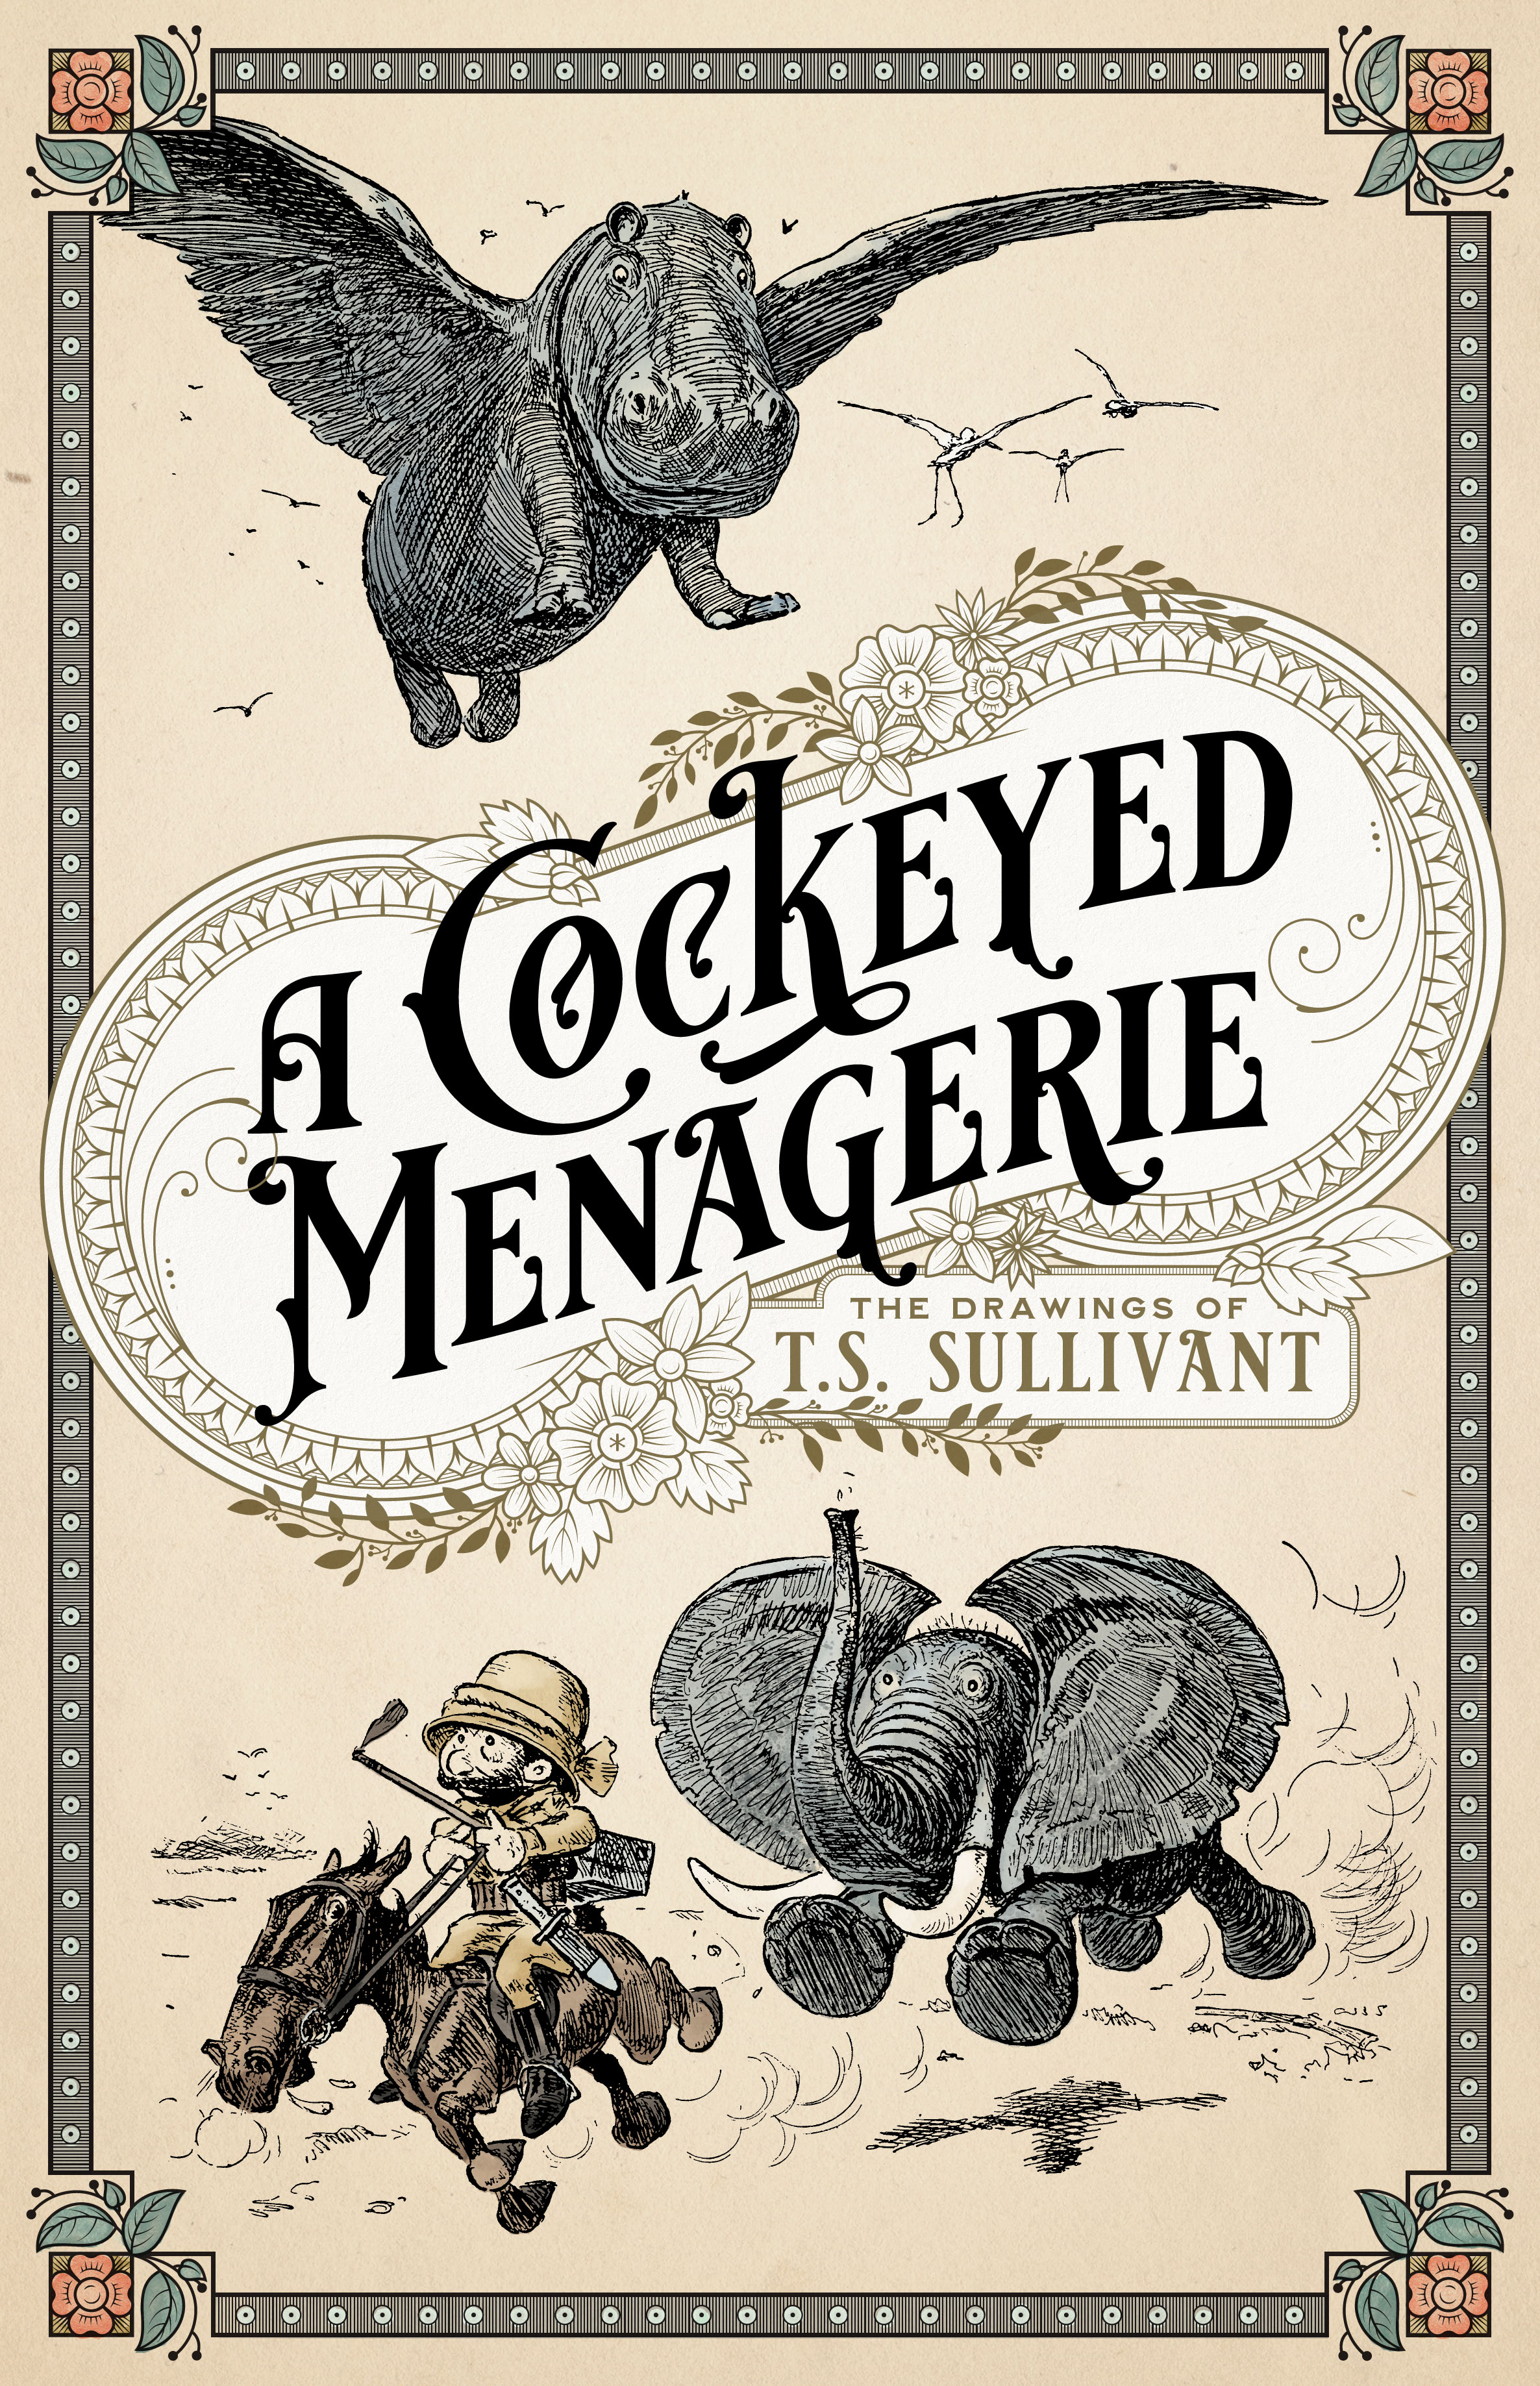 Read online A Cockeyed Menagerie: The Drawings of T.S. Sullivant comic -  Issue # TPB (Part 1) - 1